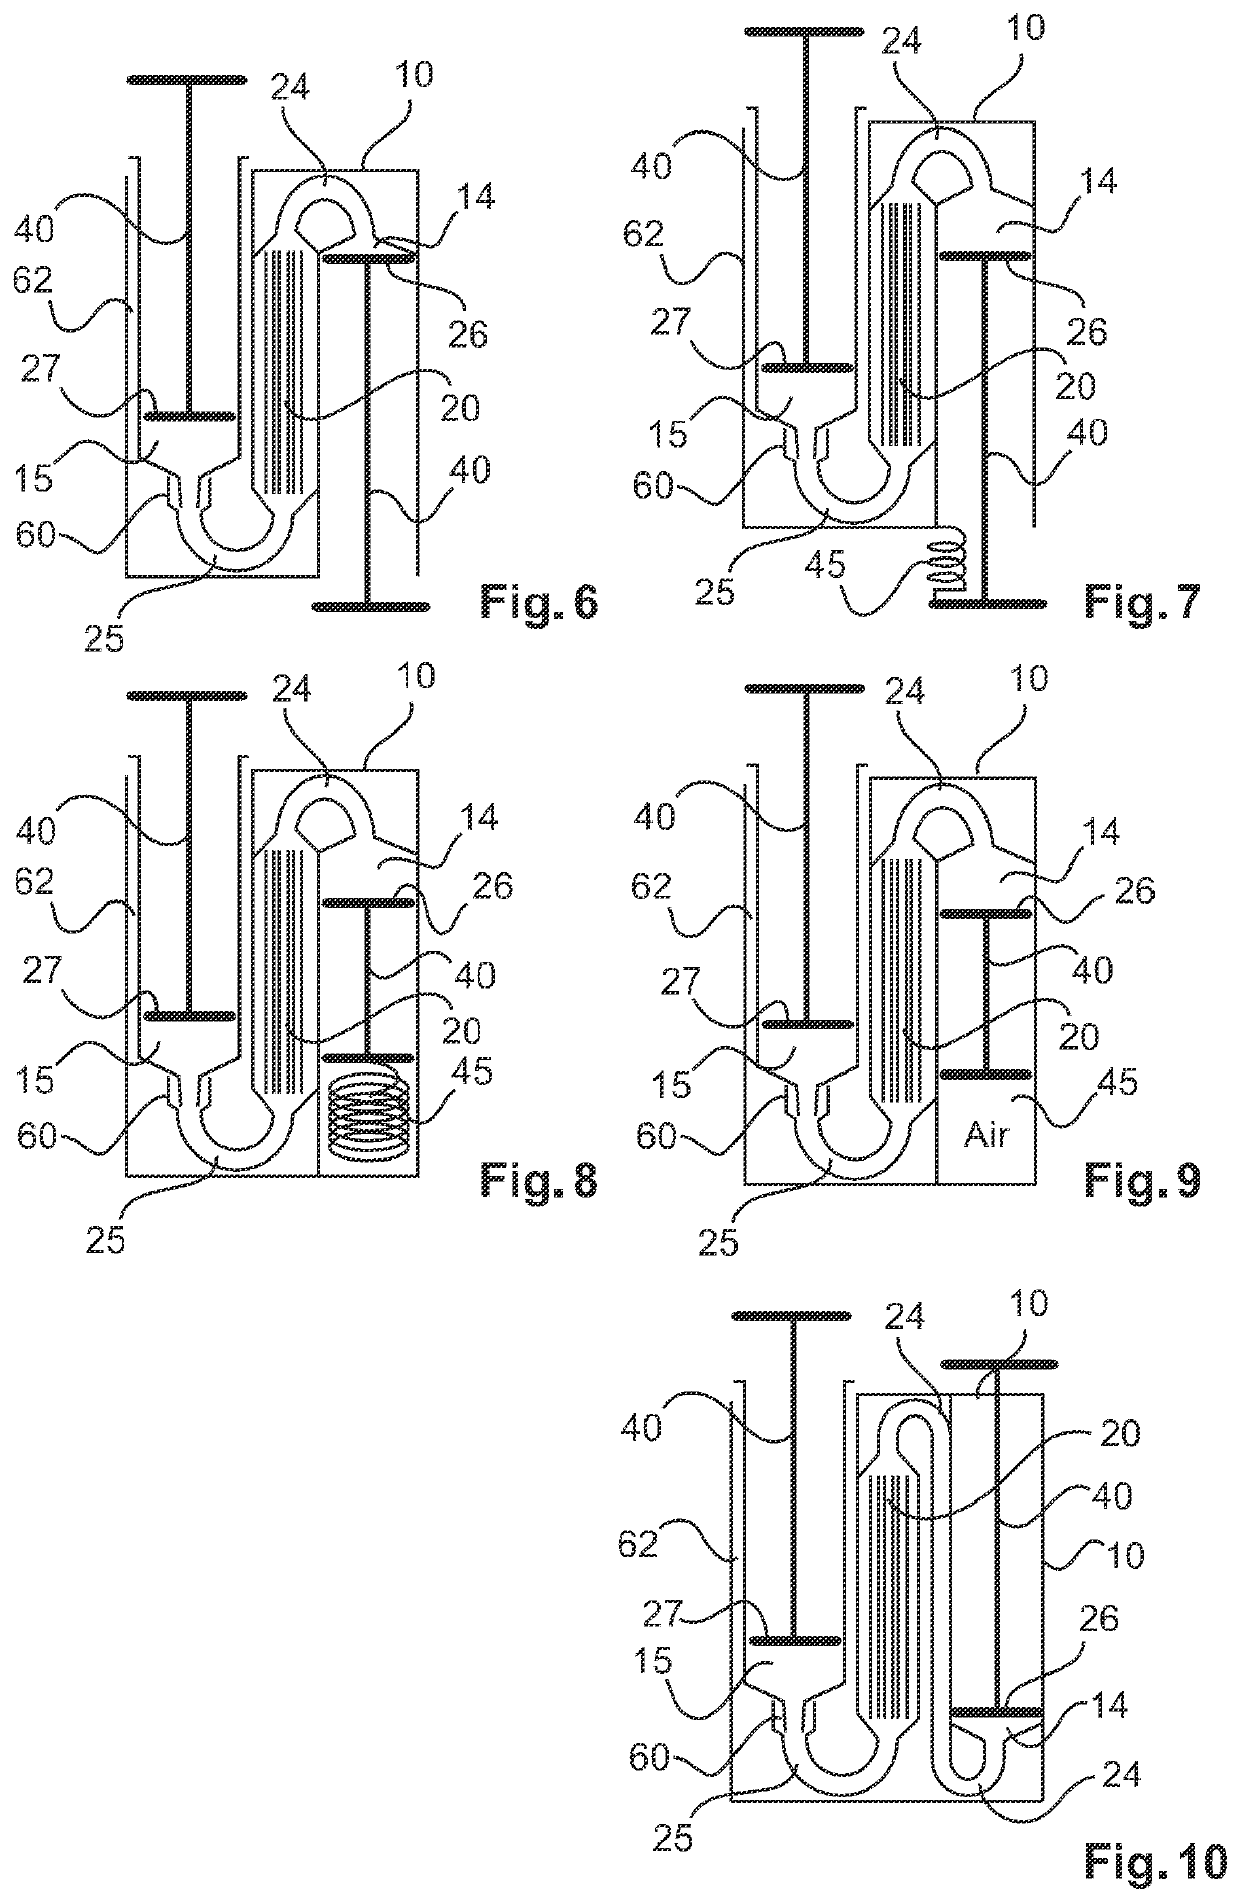 Blood filtering device